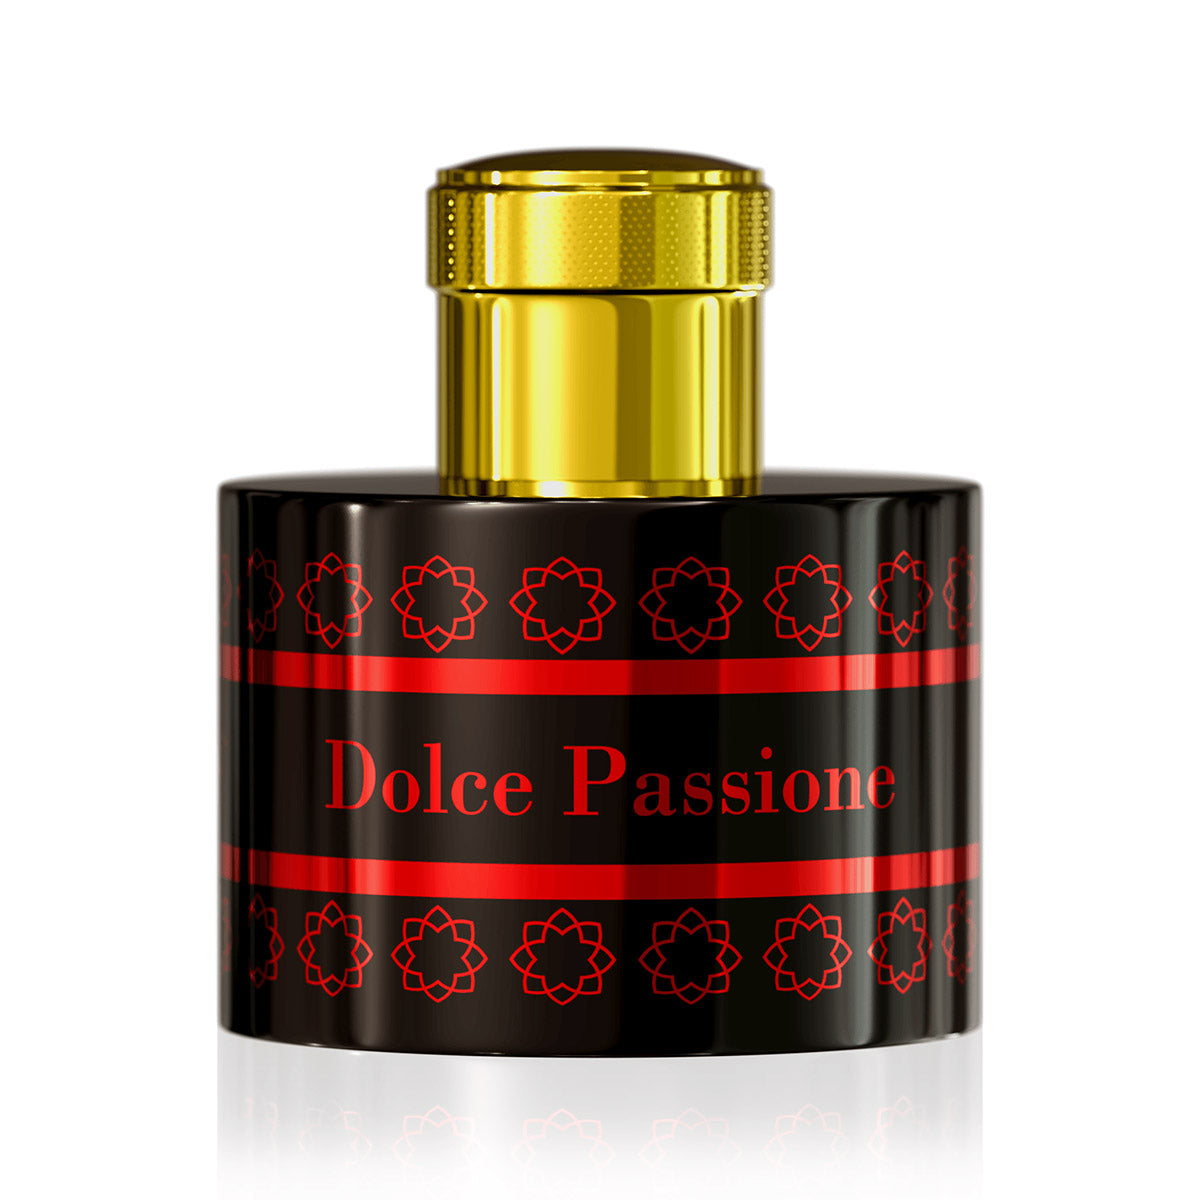 Dolce Passione - Pantheon Roma - EP100ml